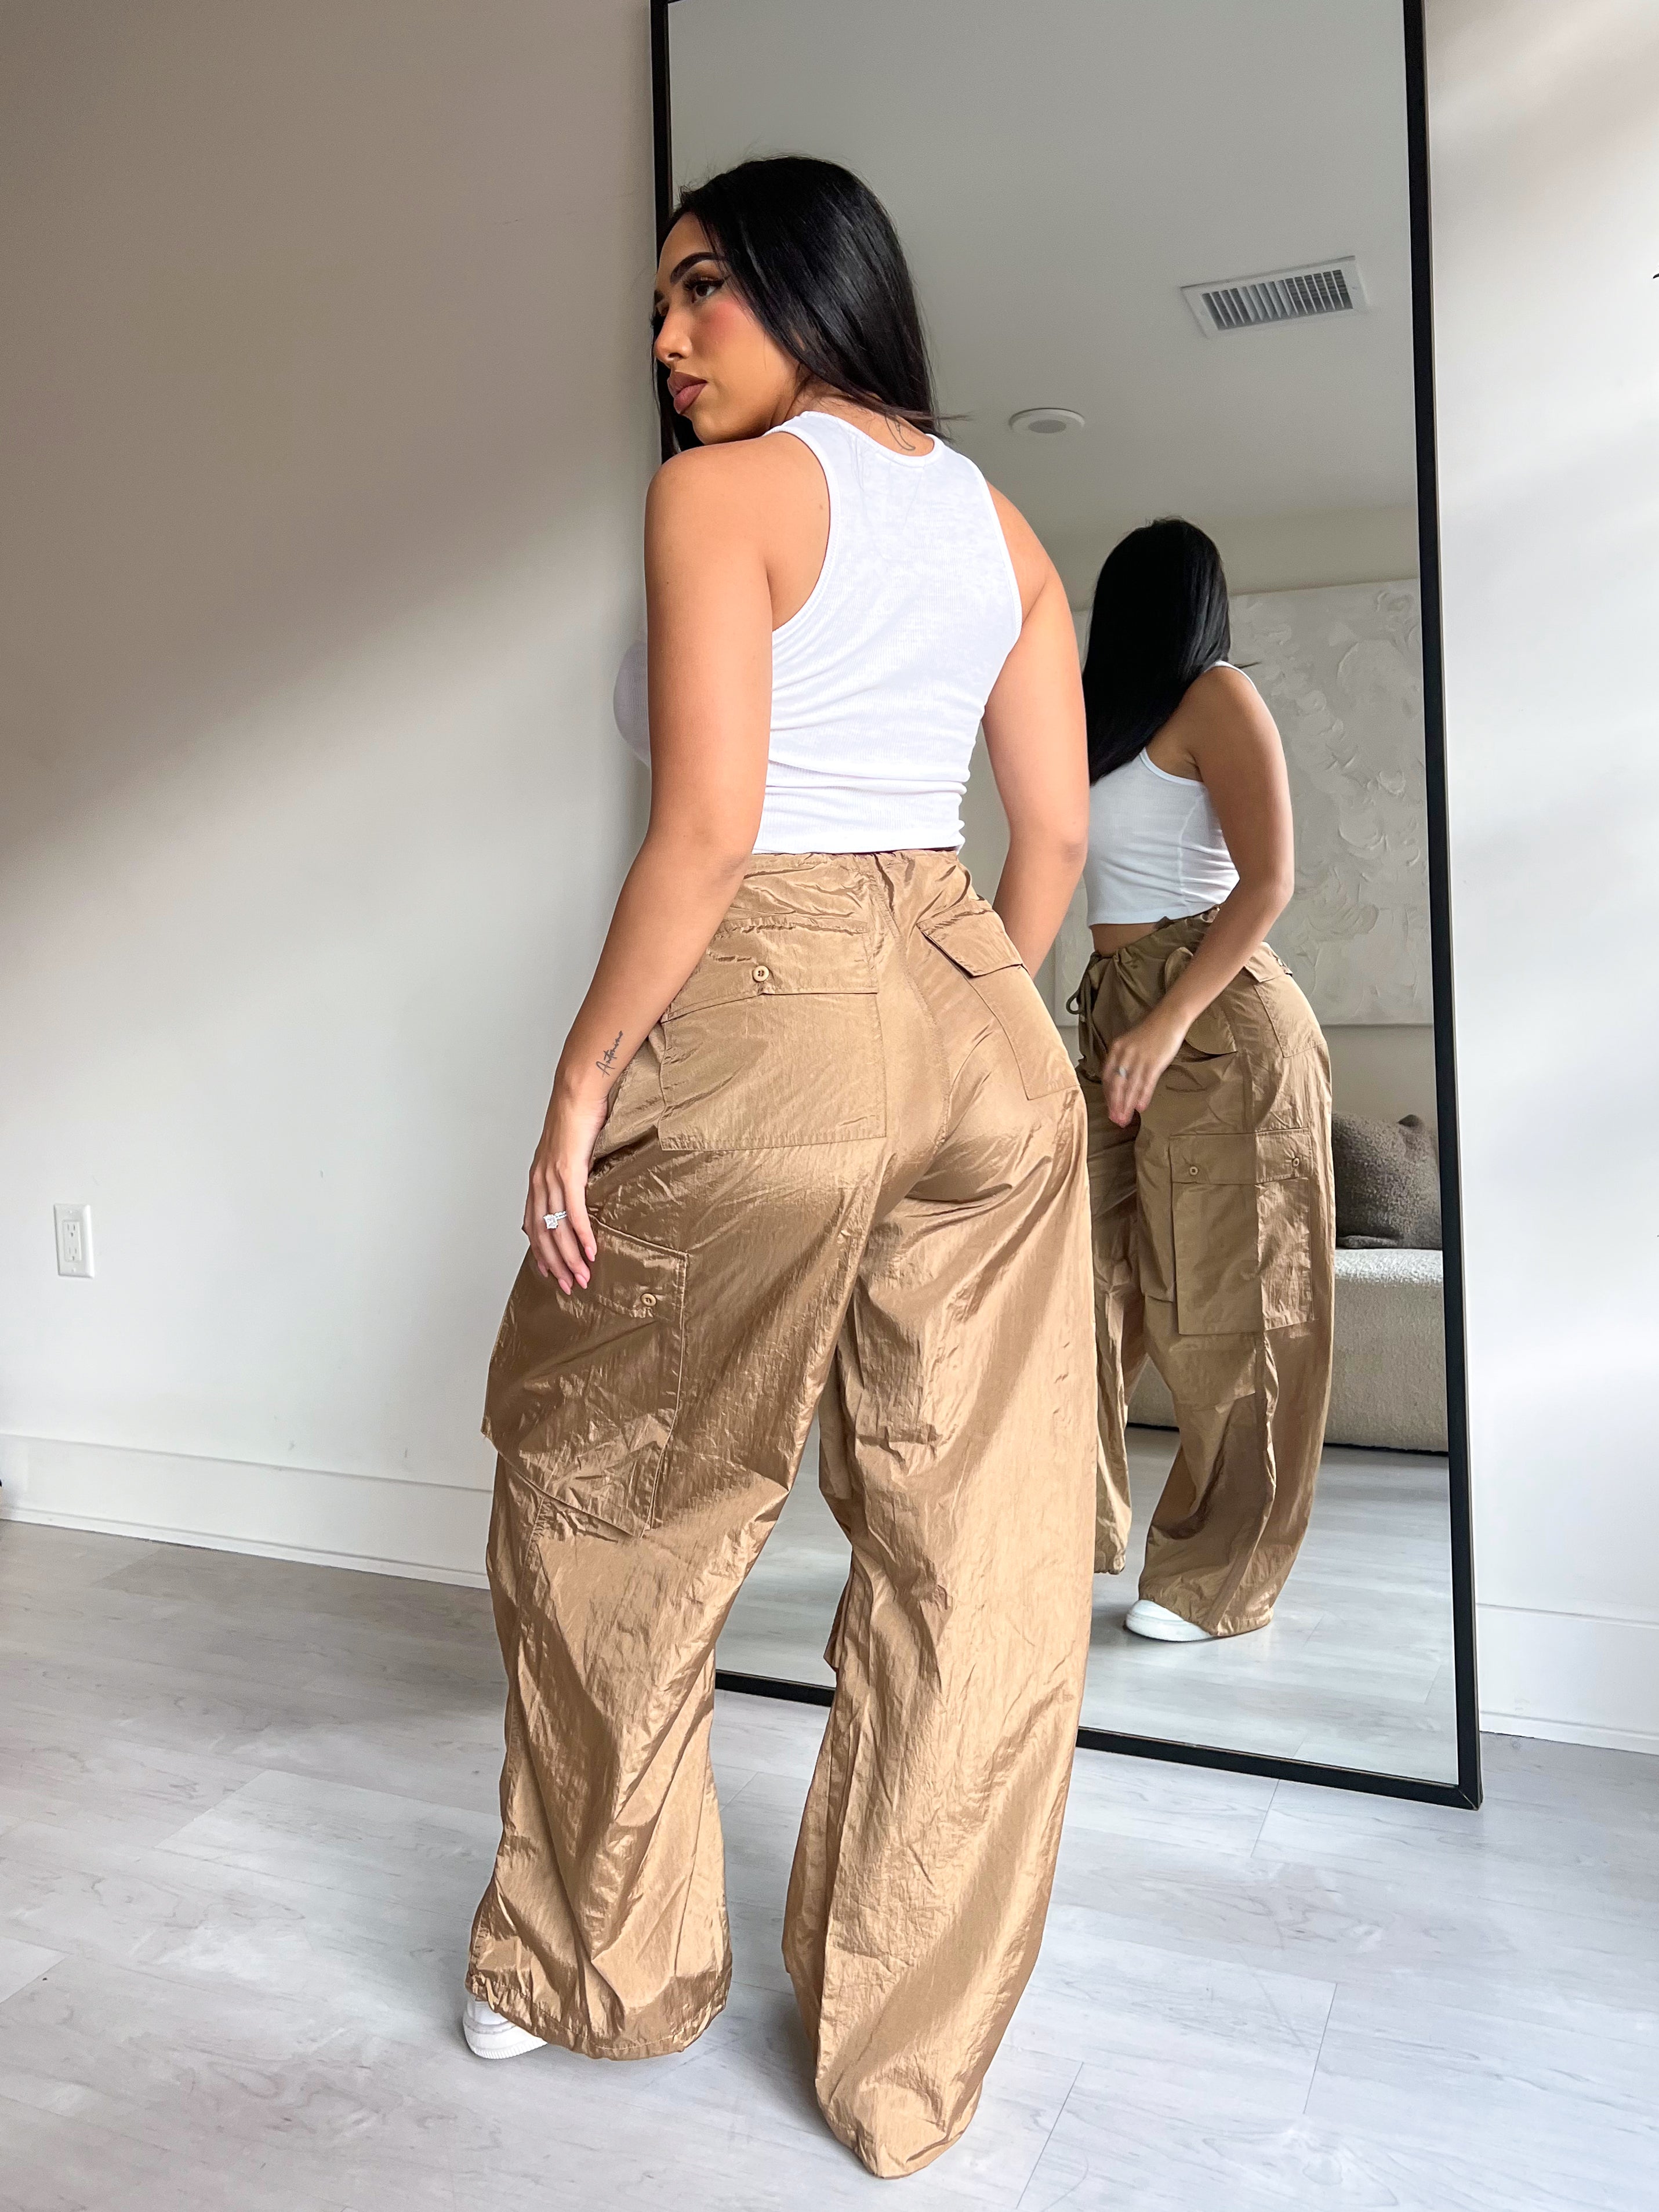 styling brown cargo pants from HALARA:) i'll link in bio and use code